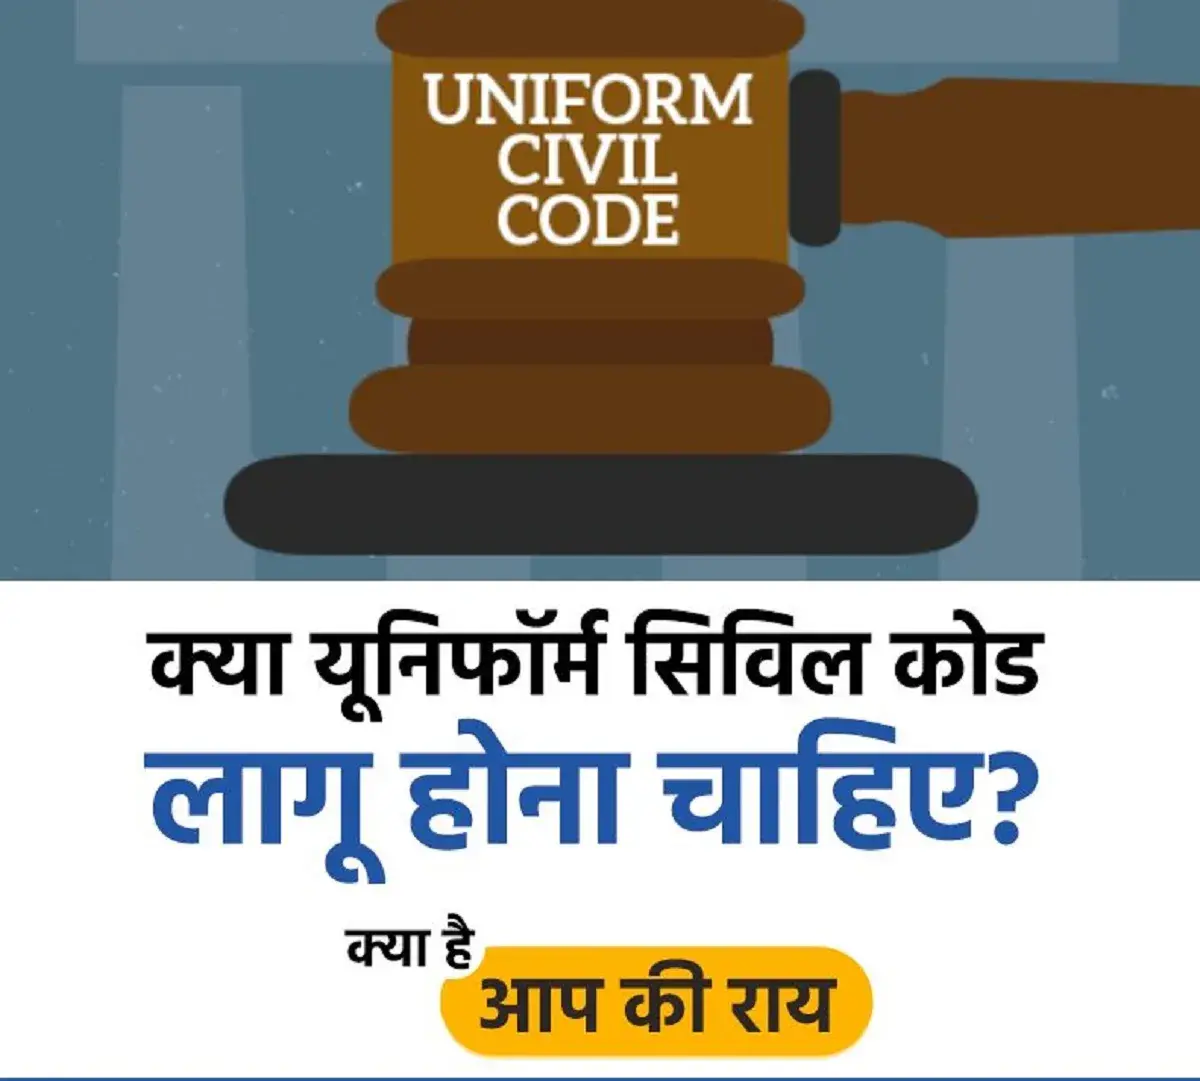 Should Uniform Civil Code be implemented share your views